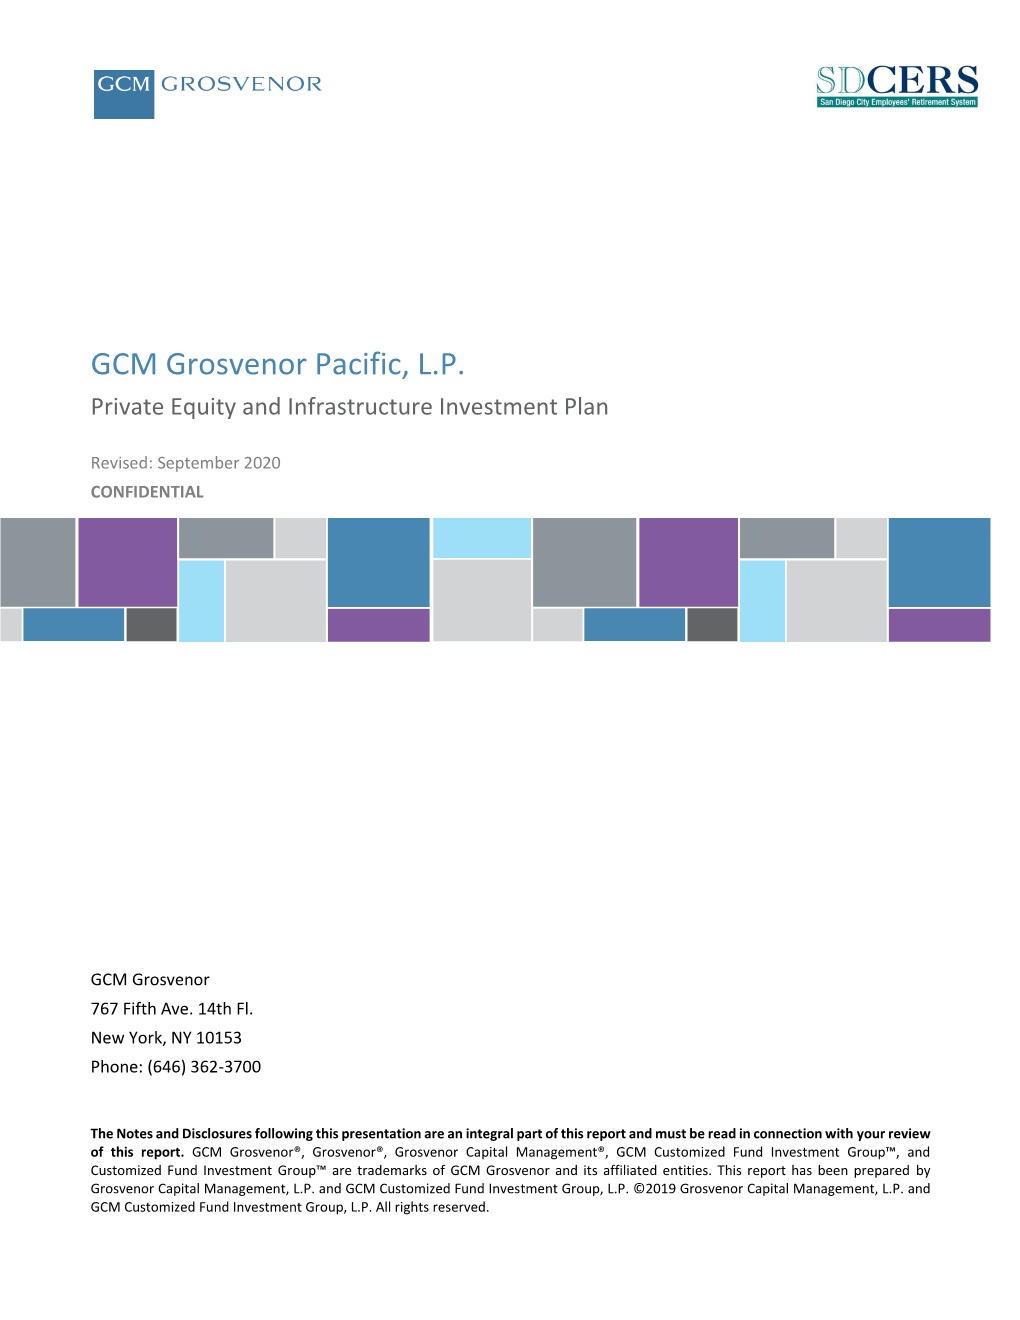 GCM Grosvenor Private Equity and Infrastructure Annual Investment